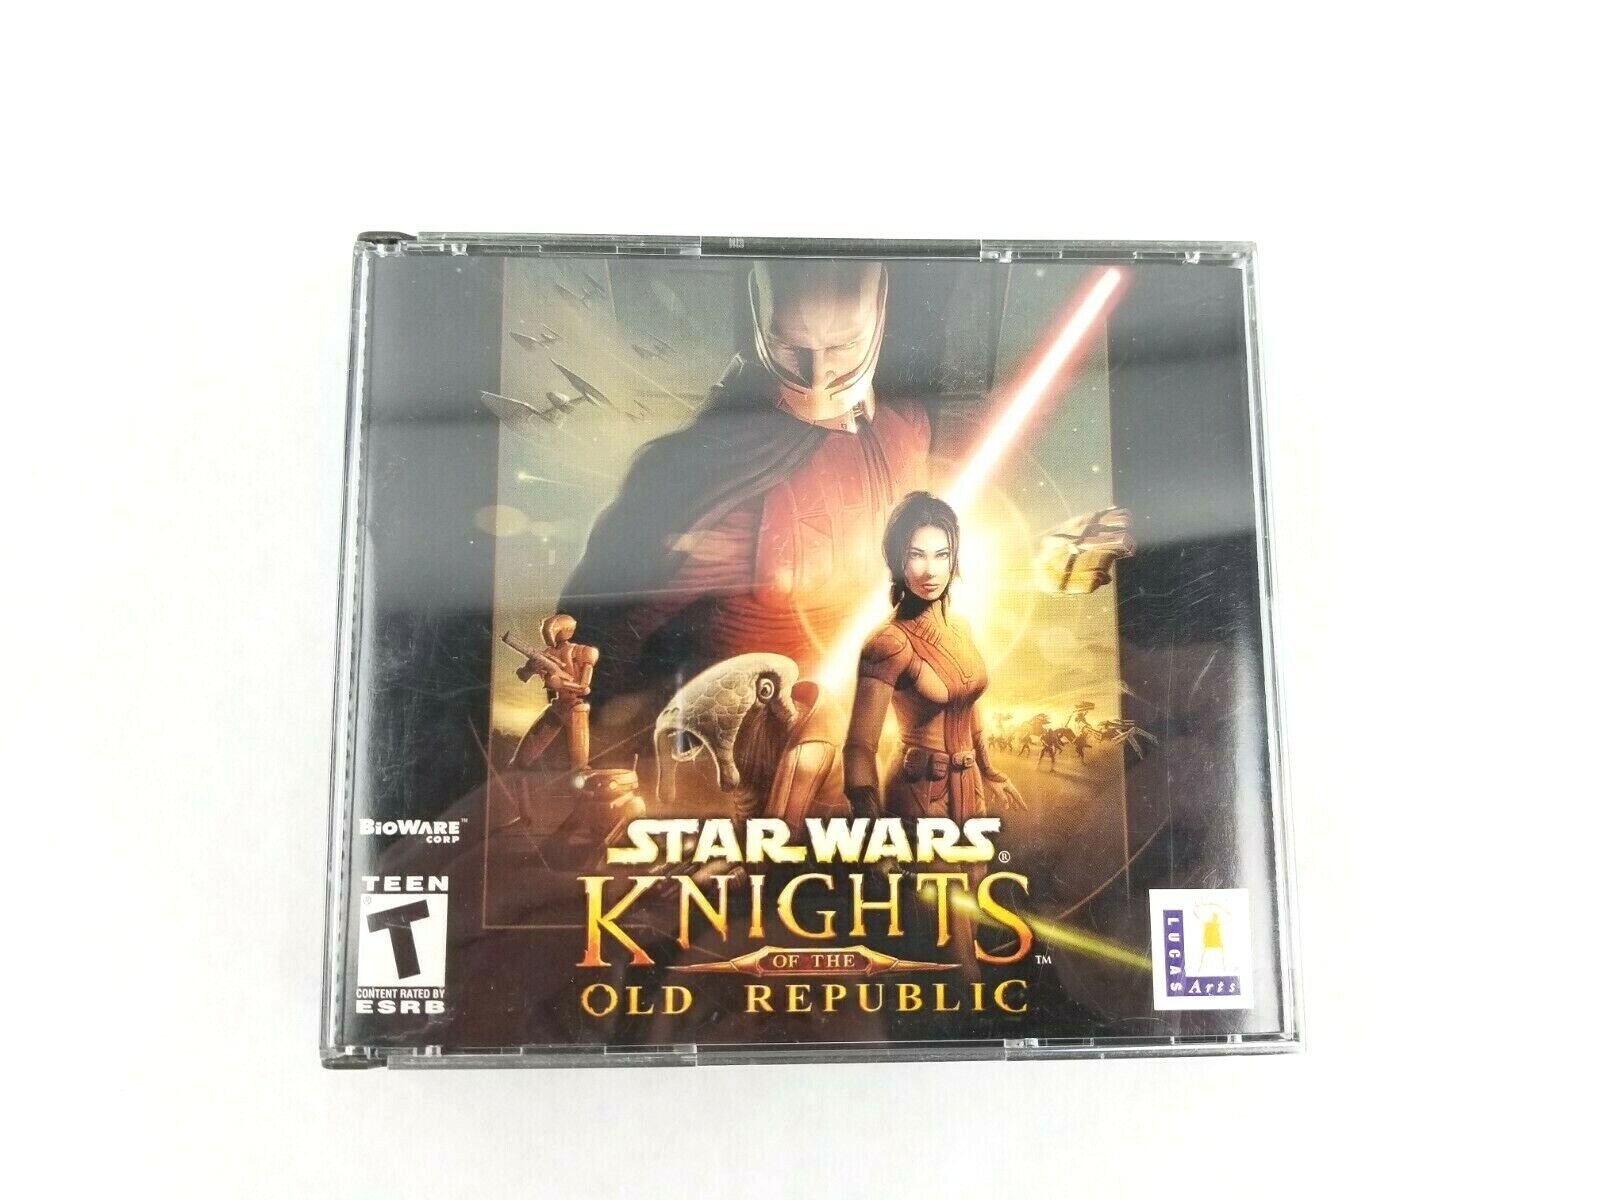 Star Wars: Knights of the Old Republic PC CD-Rom 2003 Windows CD Only